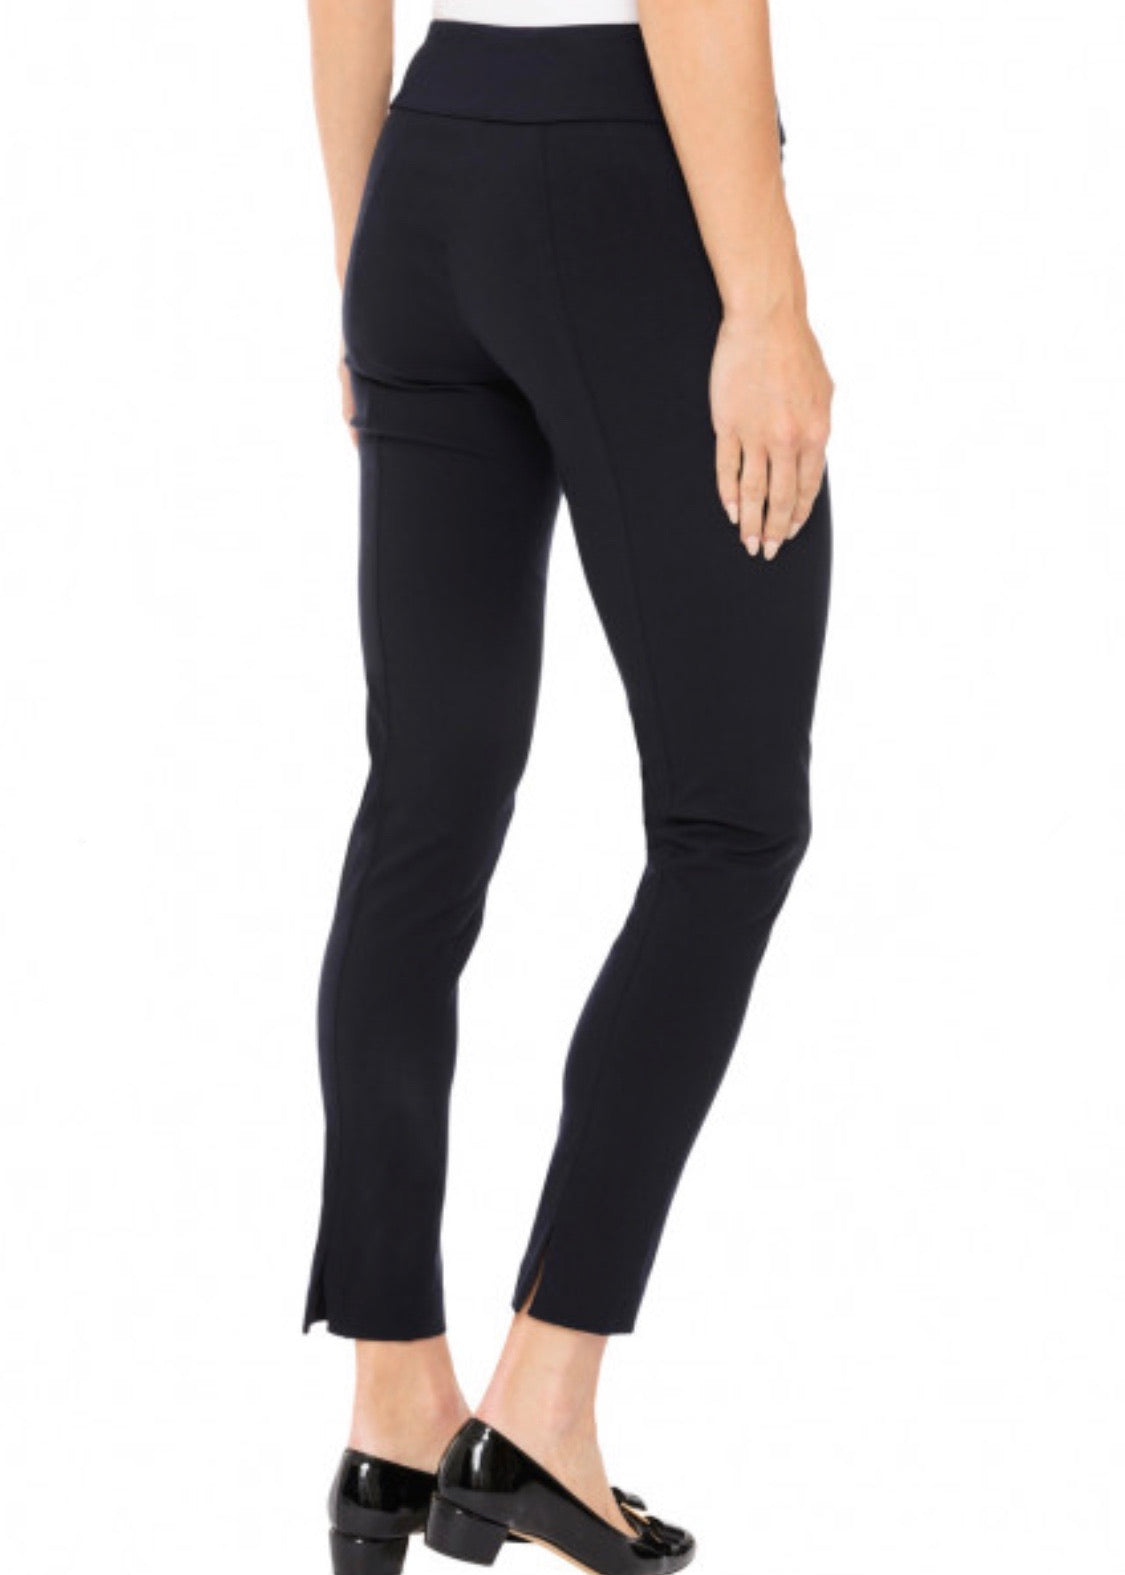 Solada Classic women's trousers with belt: for sale at 24.99€ on  Mecshopping.it